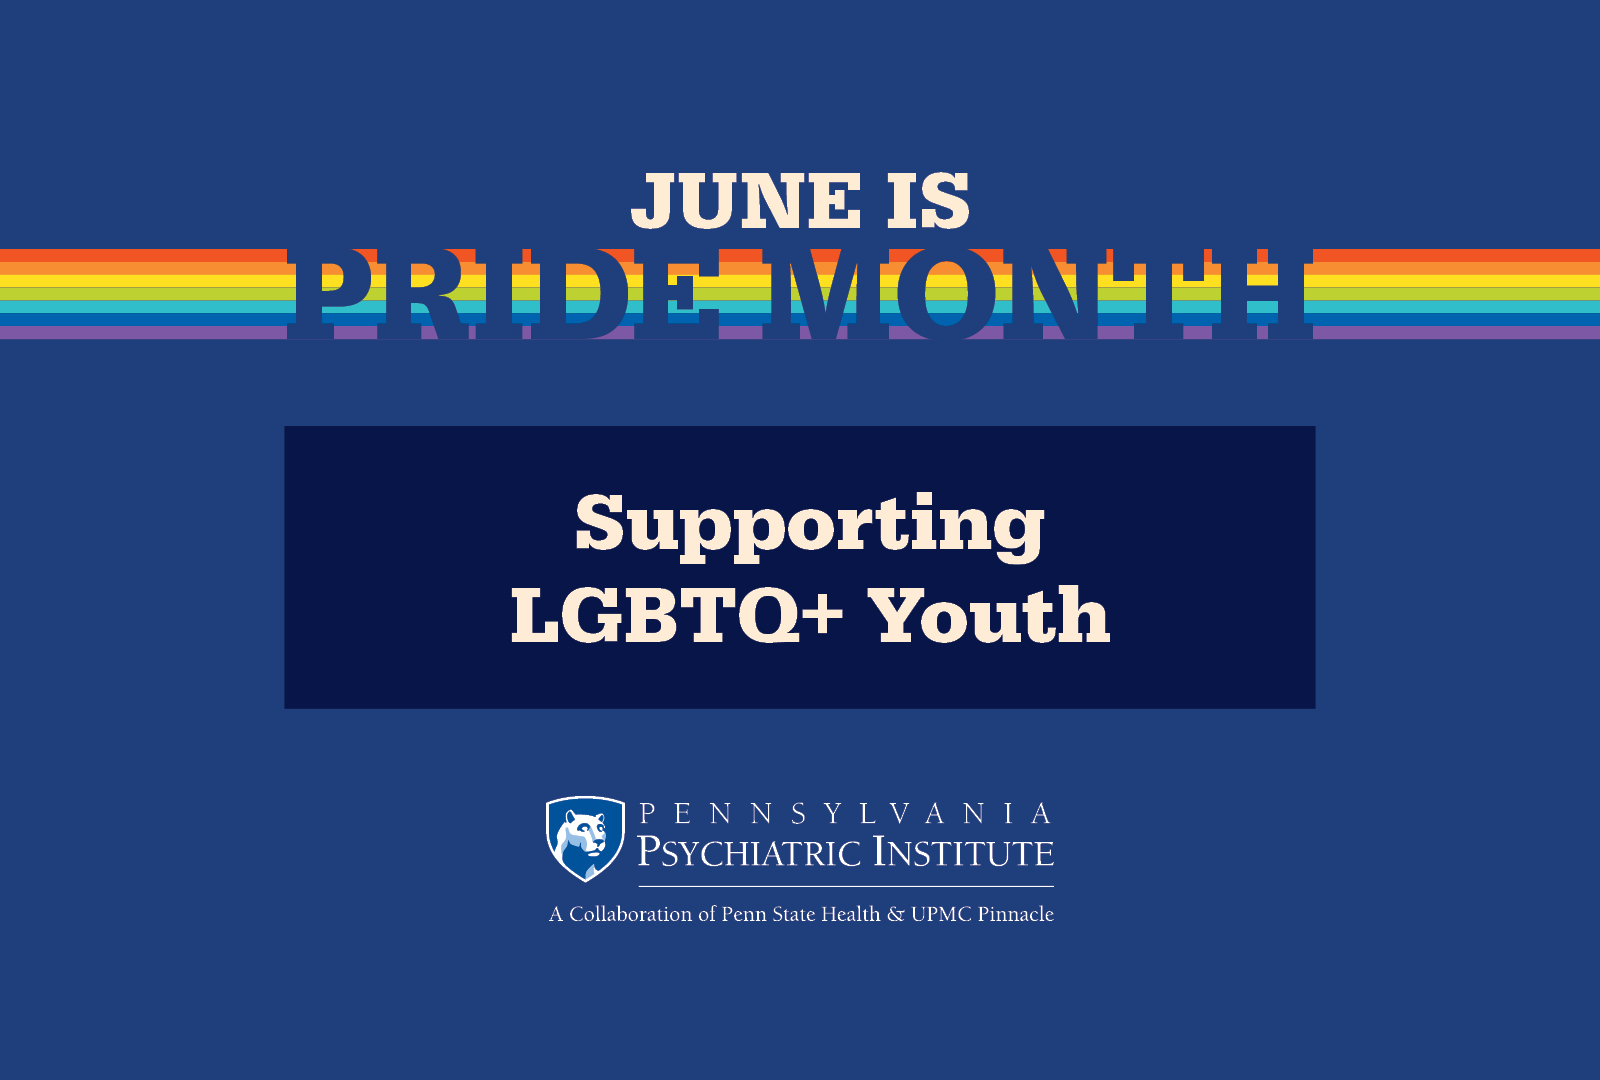 Supporting LGBTQ+ Youth